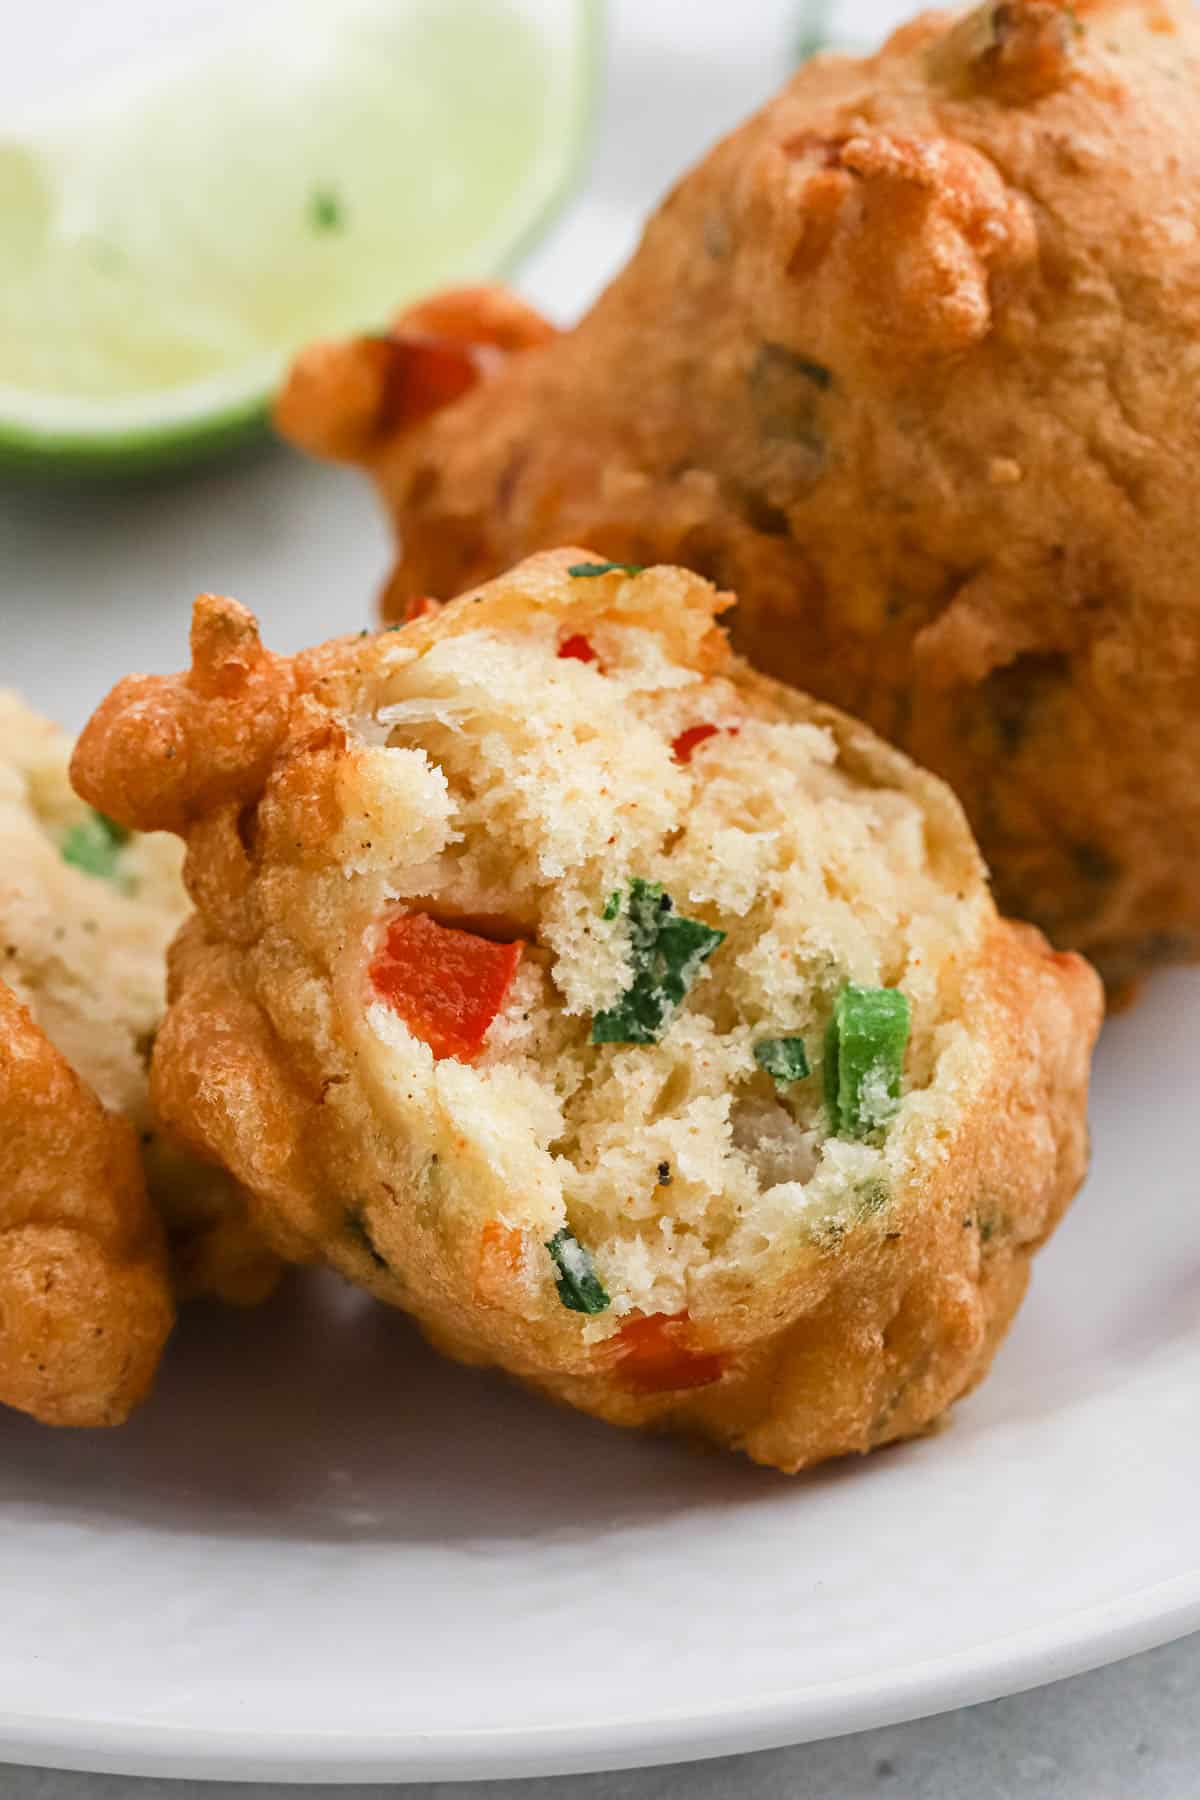 Close up of a saltfish fritter with a bite missing showing the inside